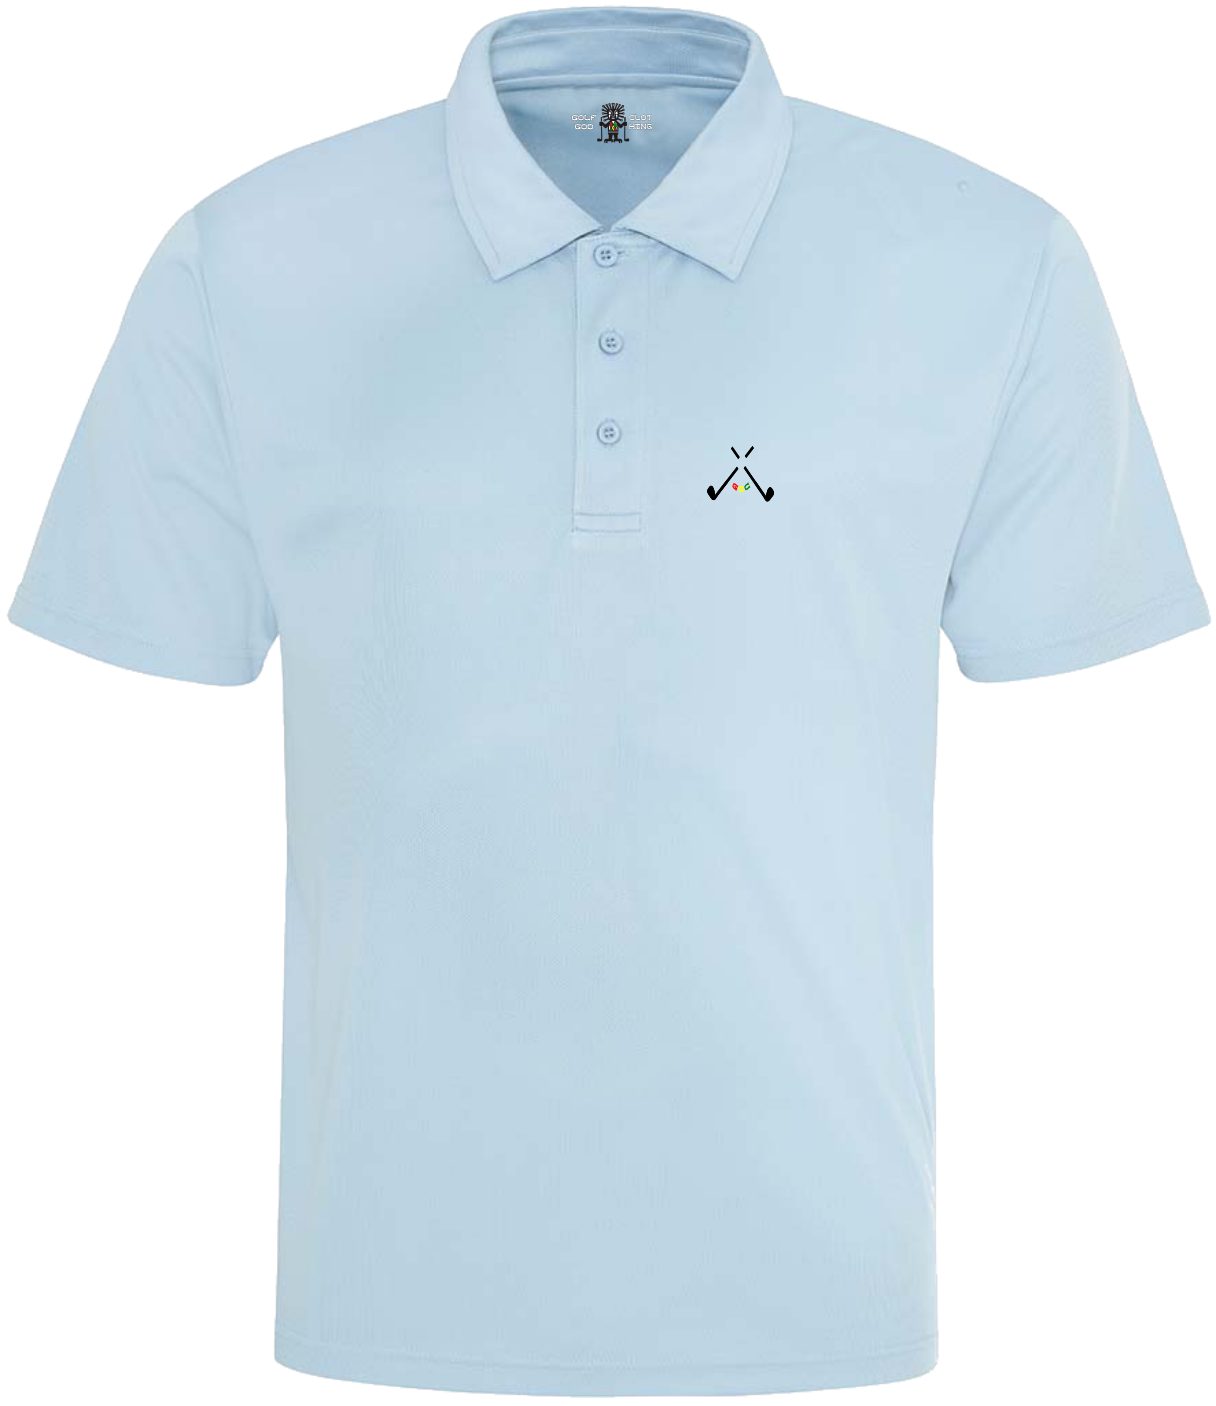 golf god clothing crossed clubs sky blue neoteric polo shirt